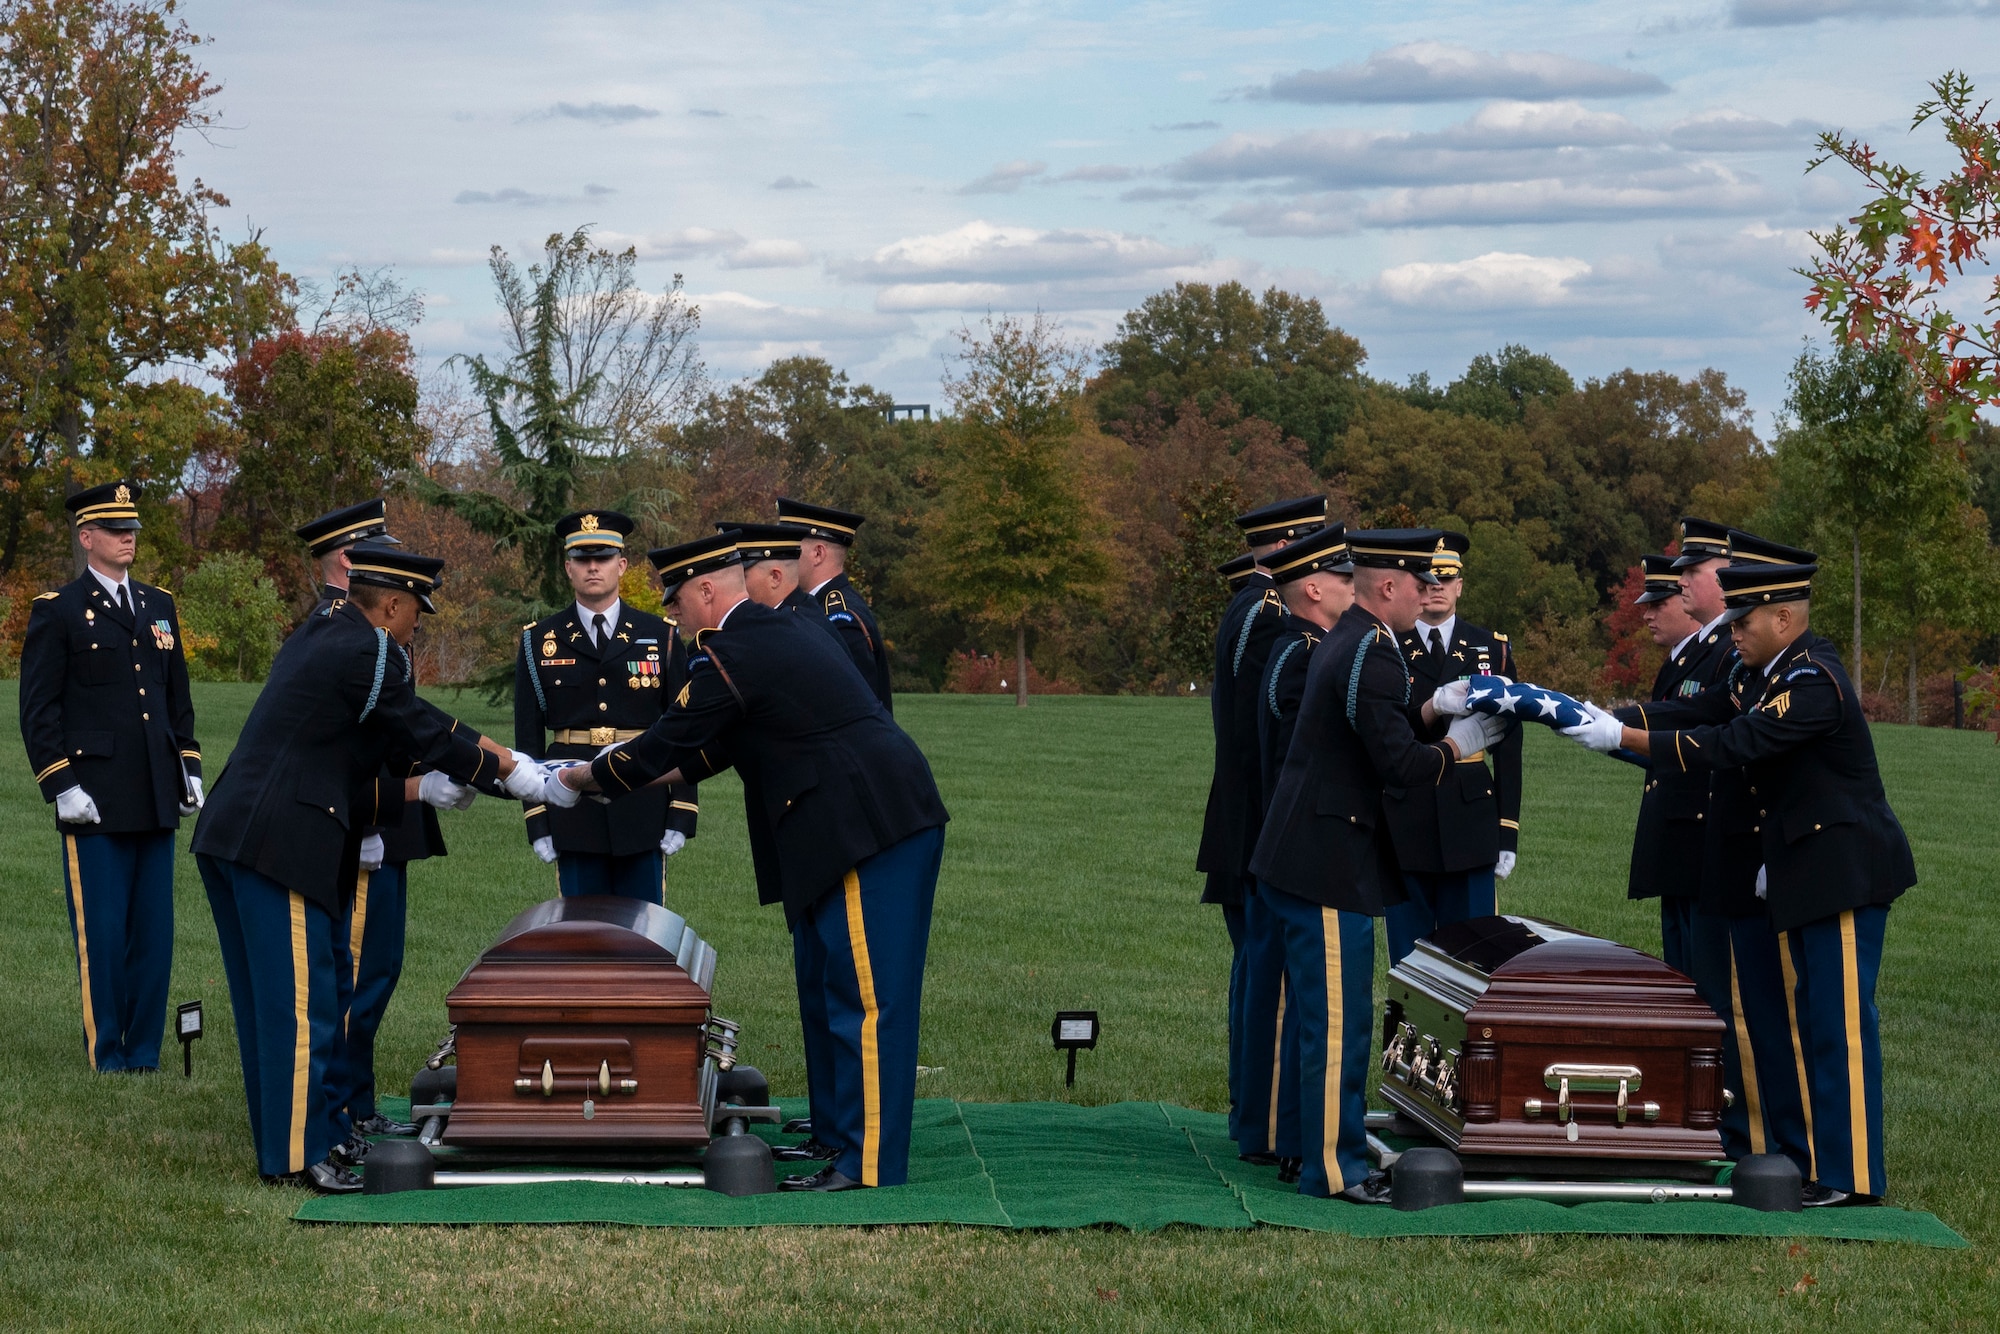 Flags are folded over caskets.